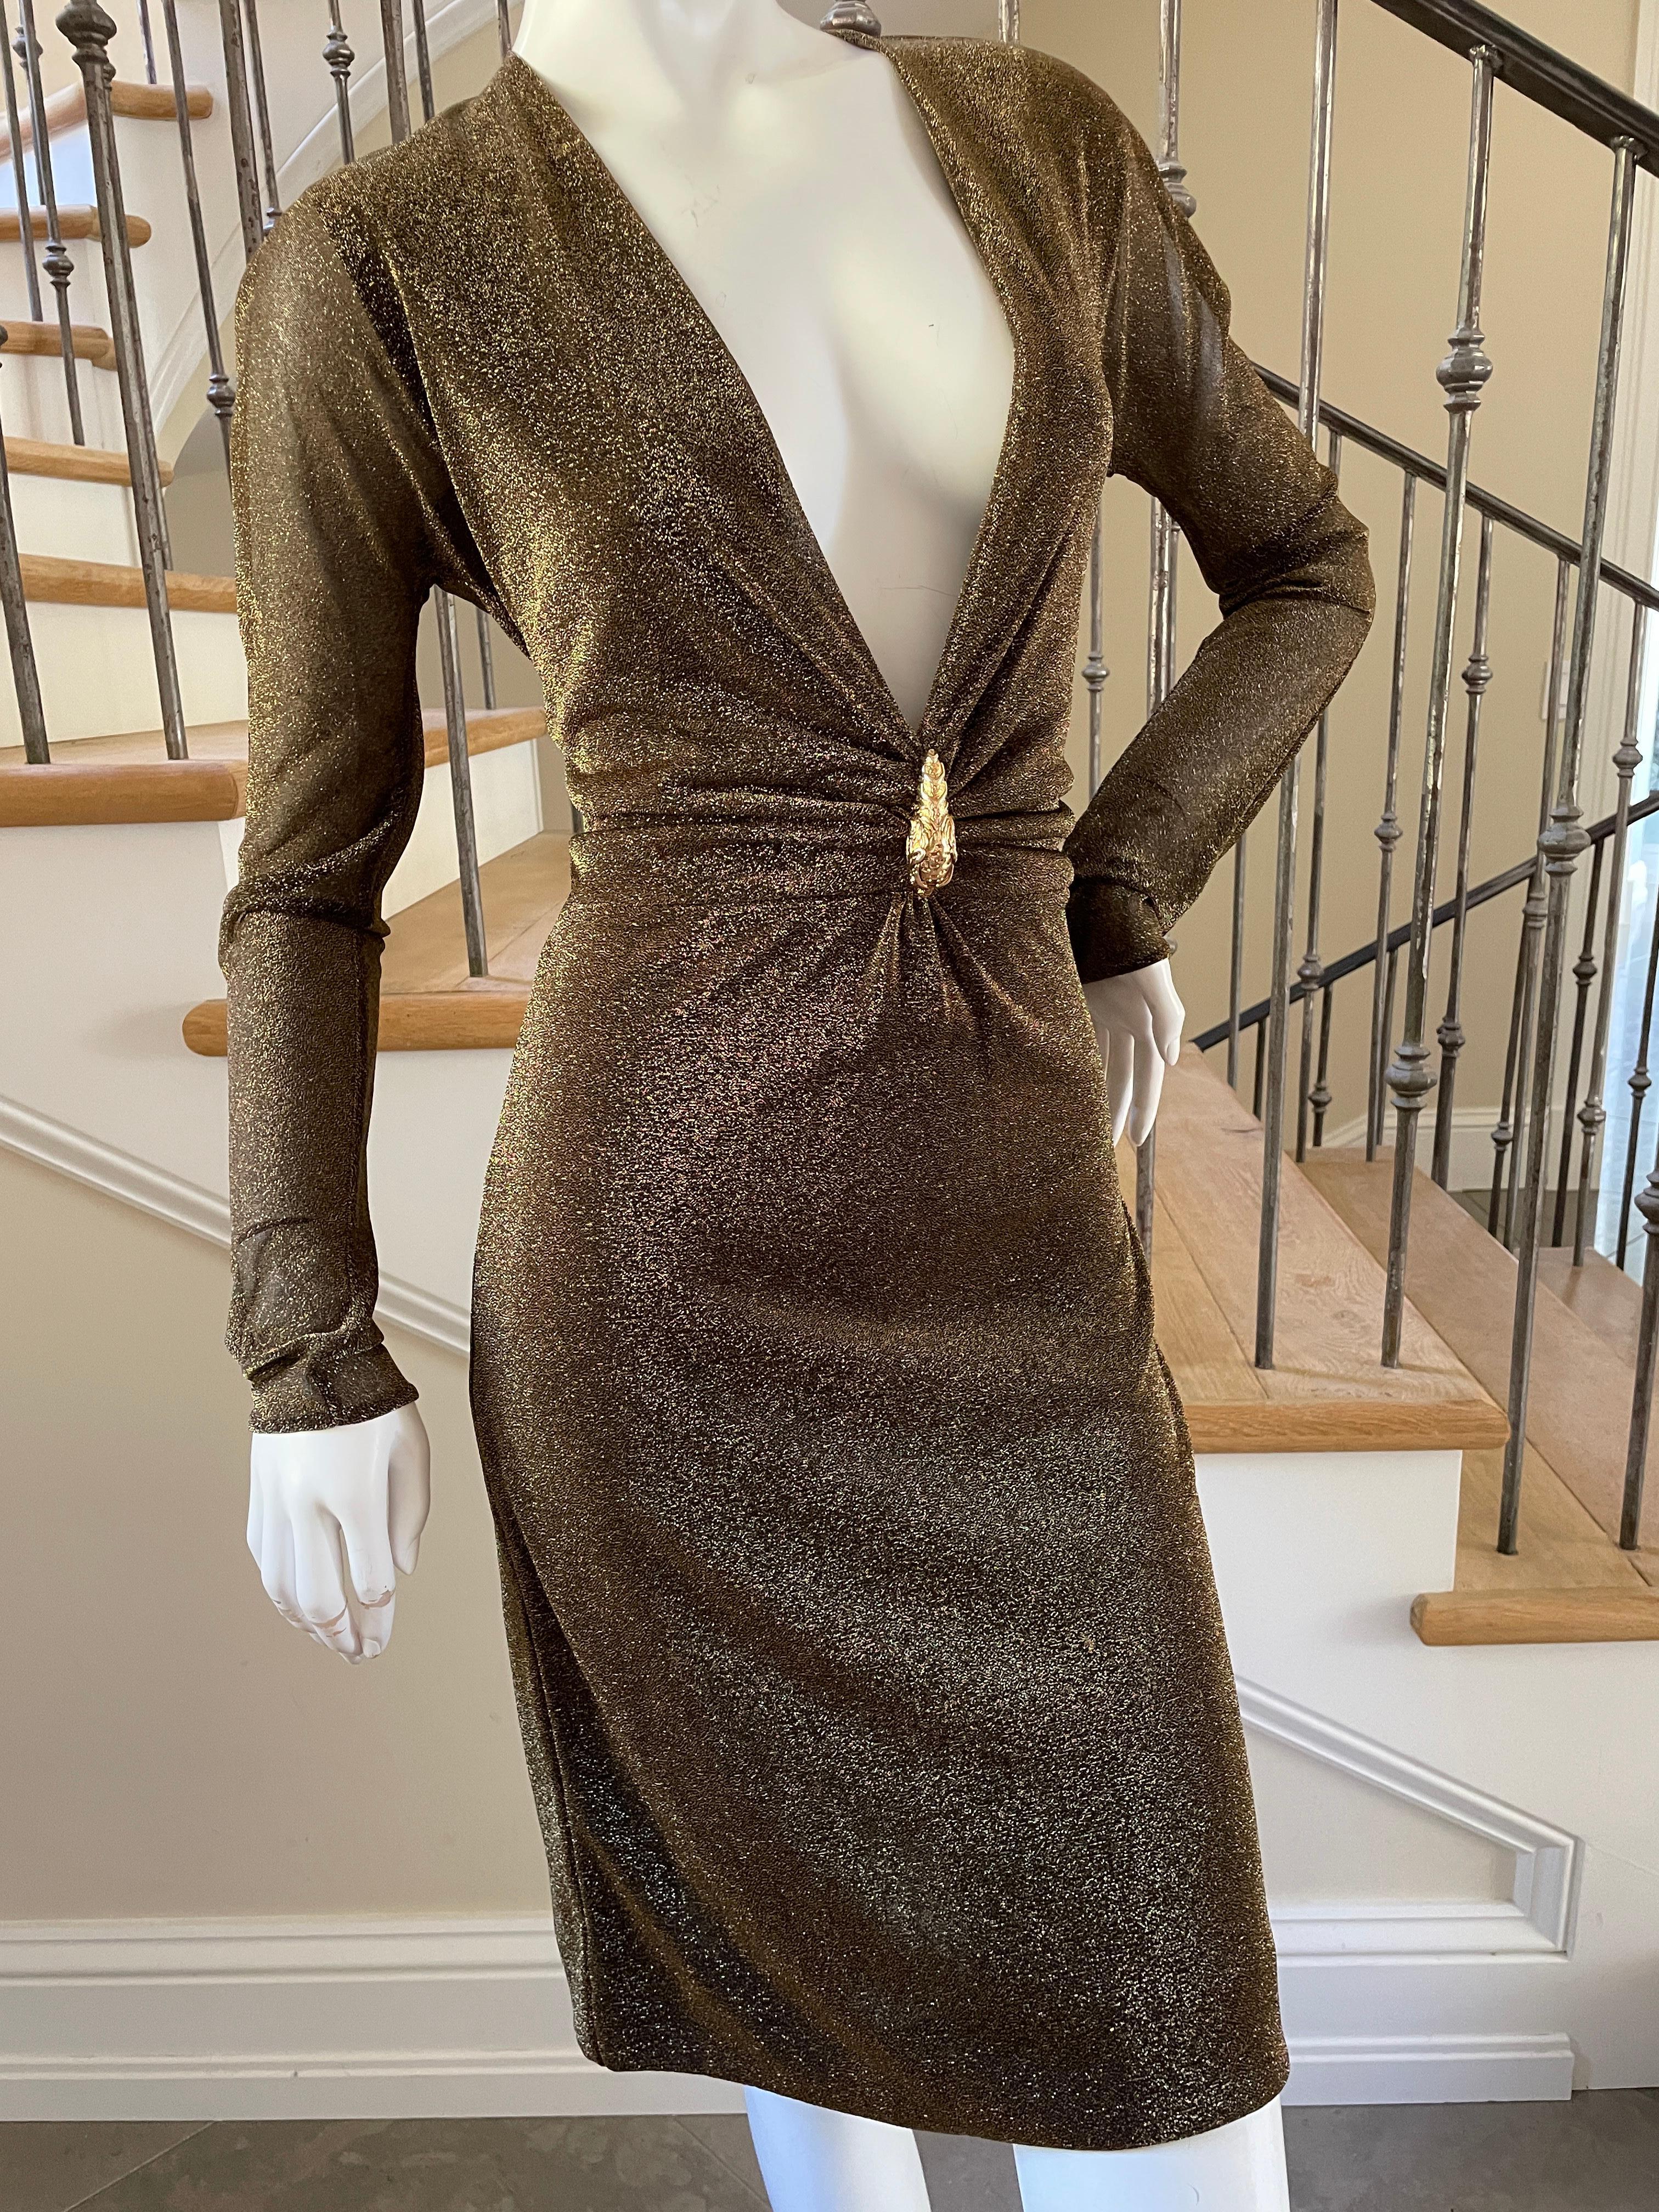 Gucci by Tom Ford Sheer Gold Dress with Dragon Ornament.
This is such a pretty dress, and has a lot of shimmer, and stretch.

Size 40
BUst 40